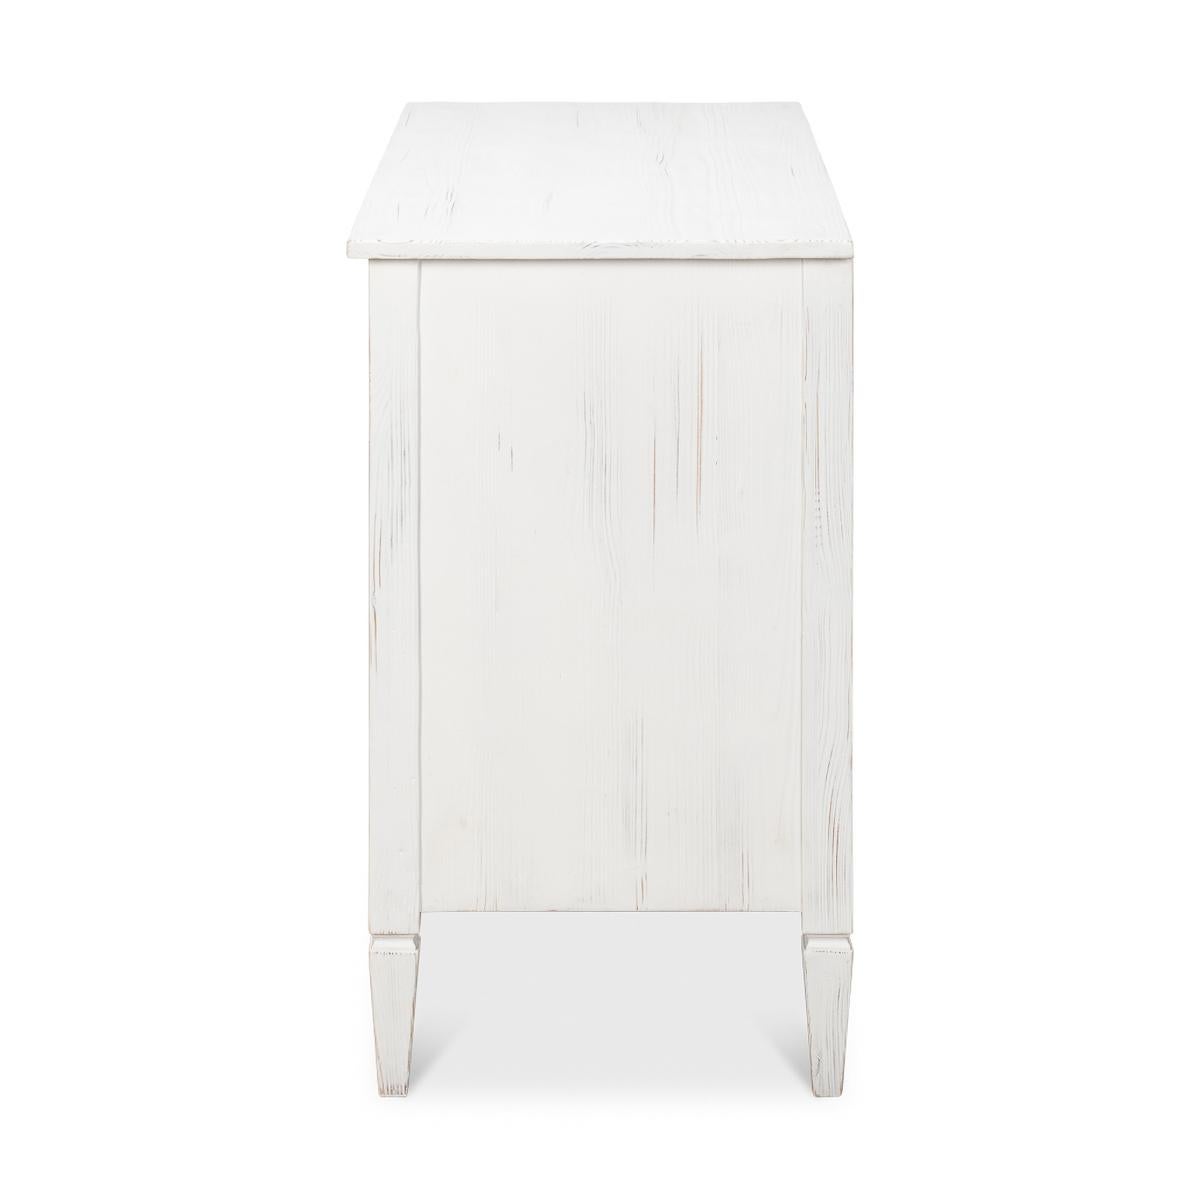 Wood French Provincial White Painted Dresser For Sale